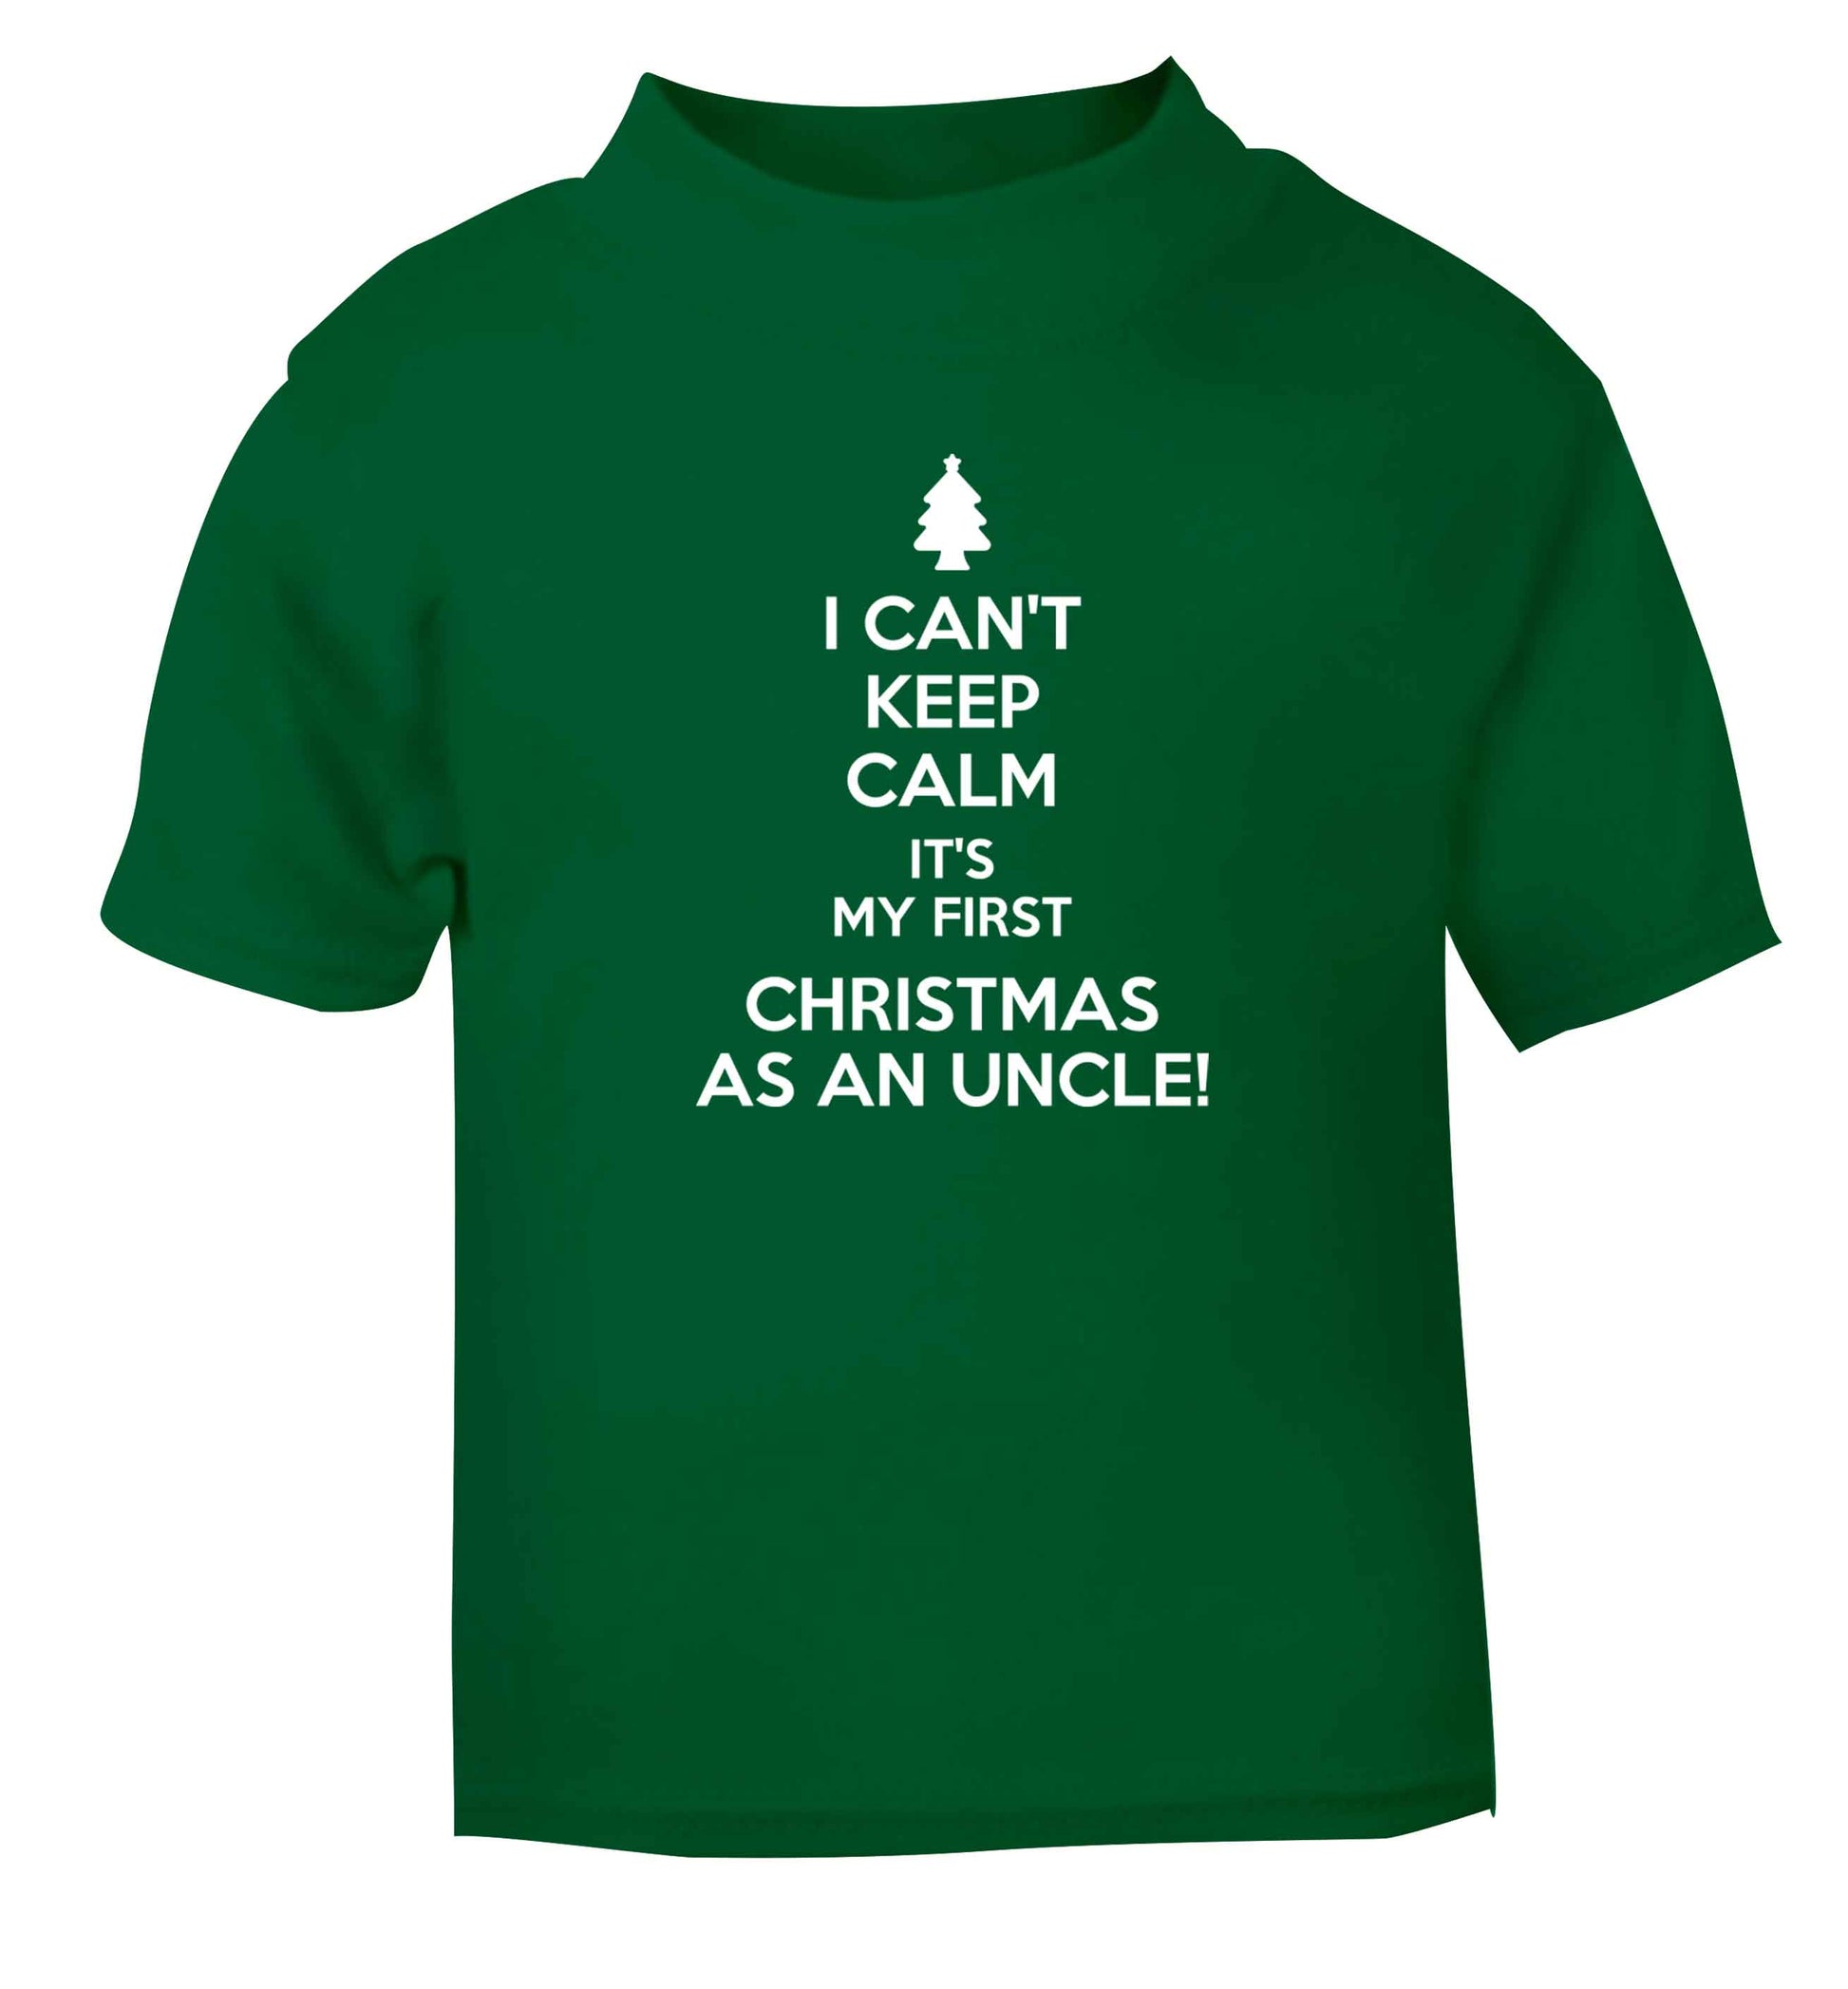 I can't keep calm it's my first Christmas as an uncle! green Baby Toddler Tshirt 2 Years